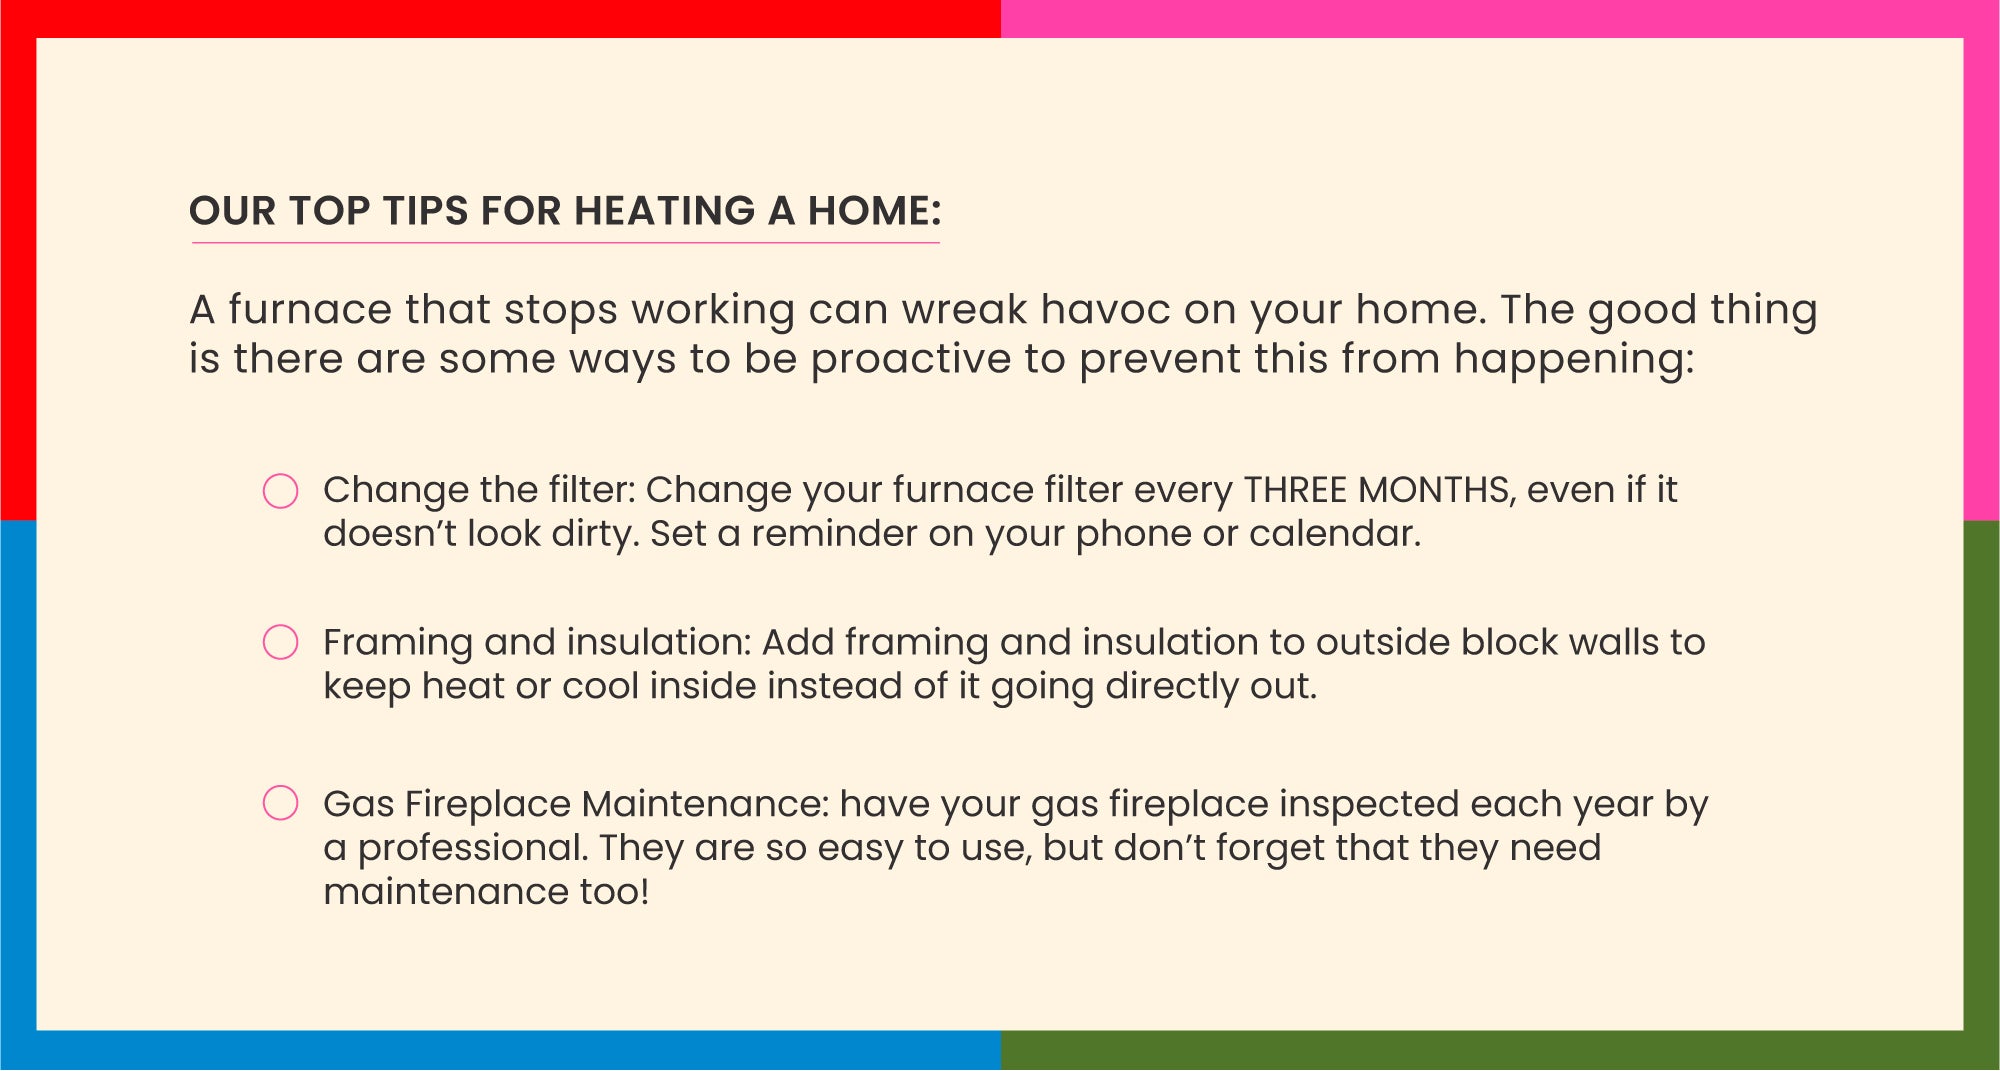 Our Top Tips for Heating a Home